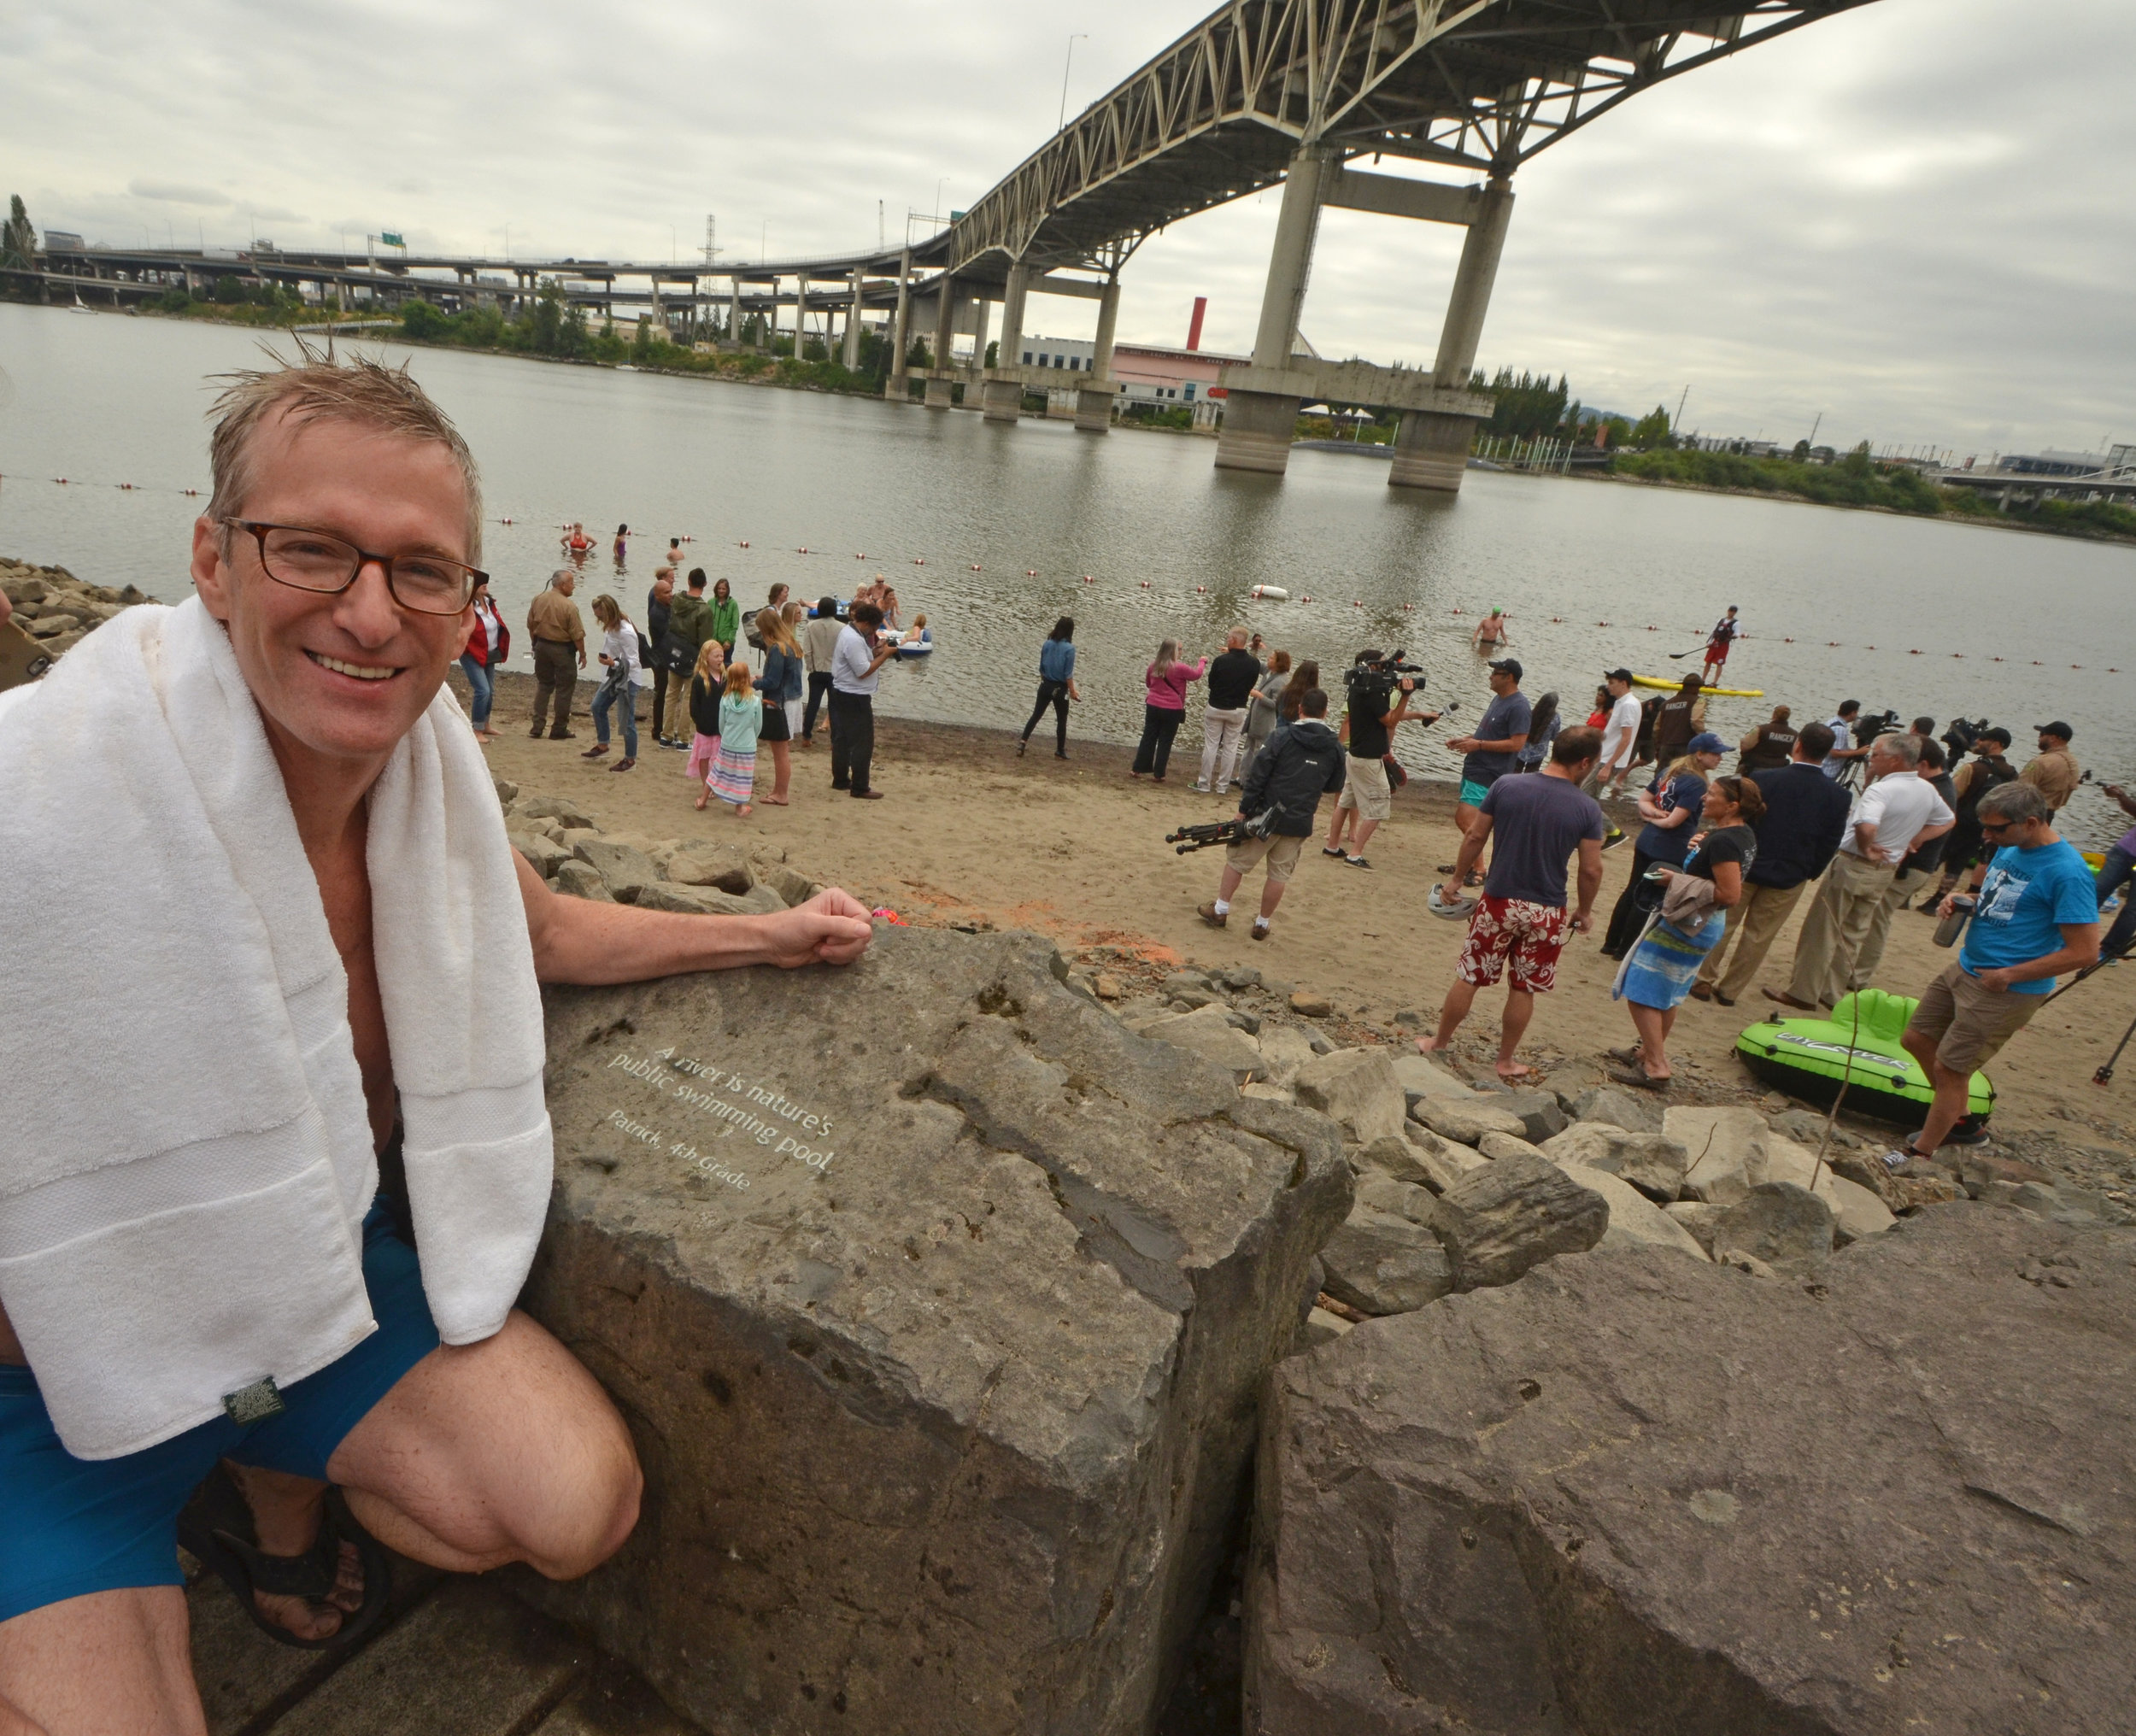  Mayor Ted Wheeler beside Honoring Our Rivers student poem at Poet's Beach. 